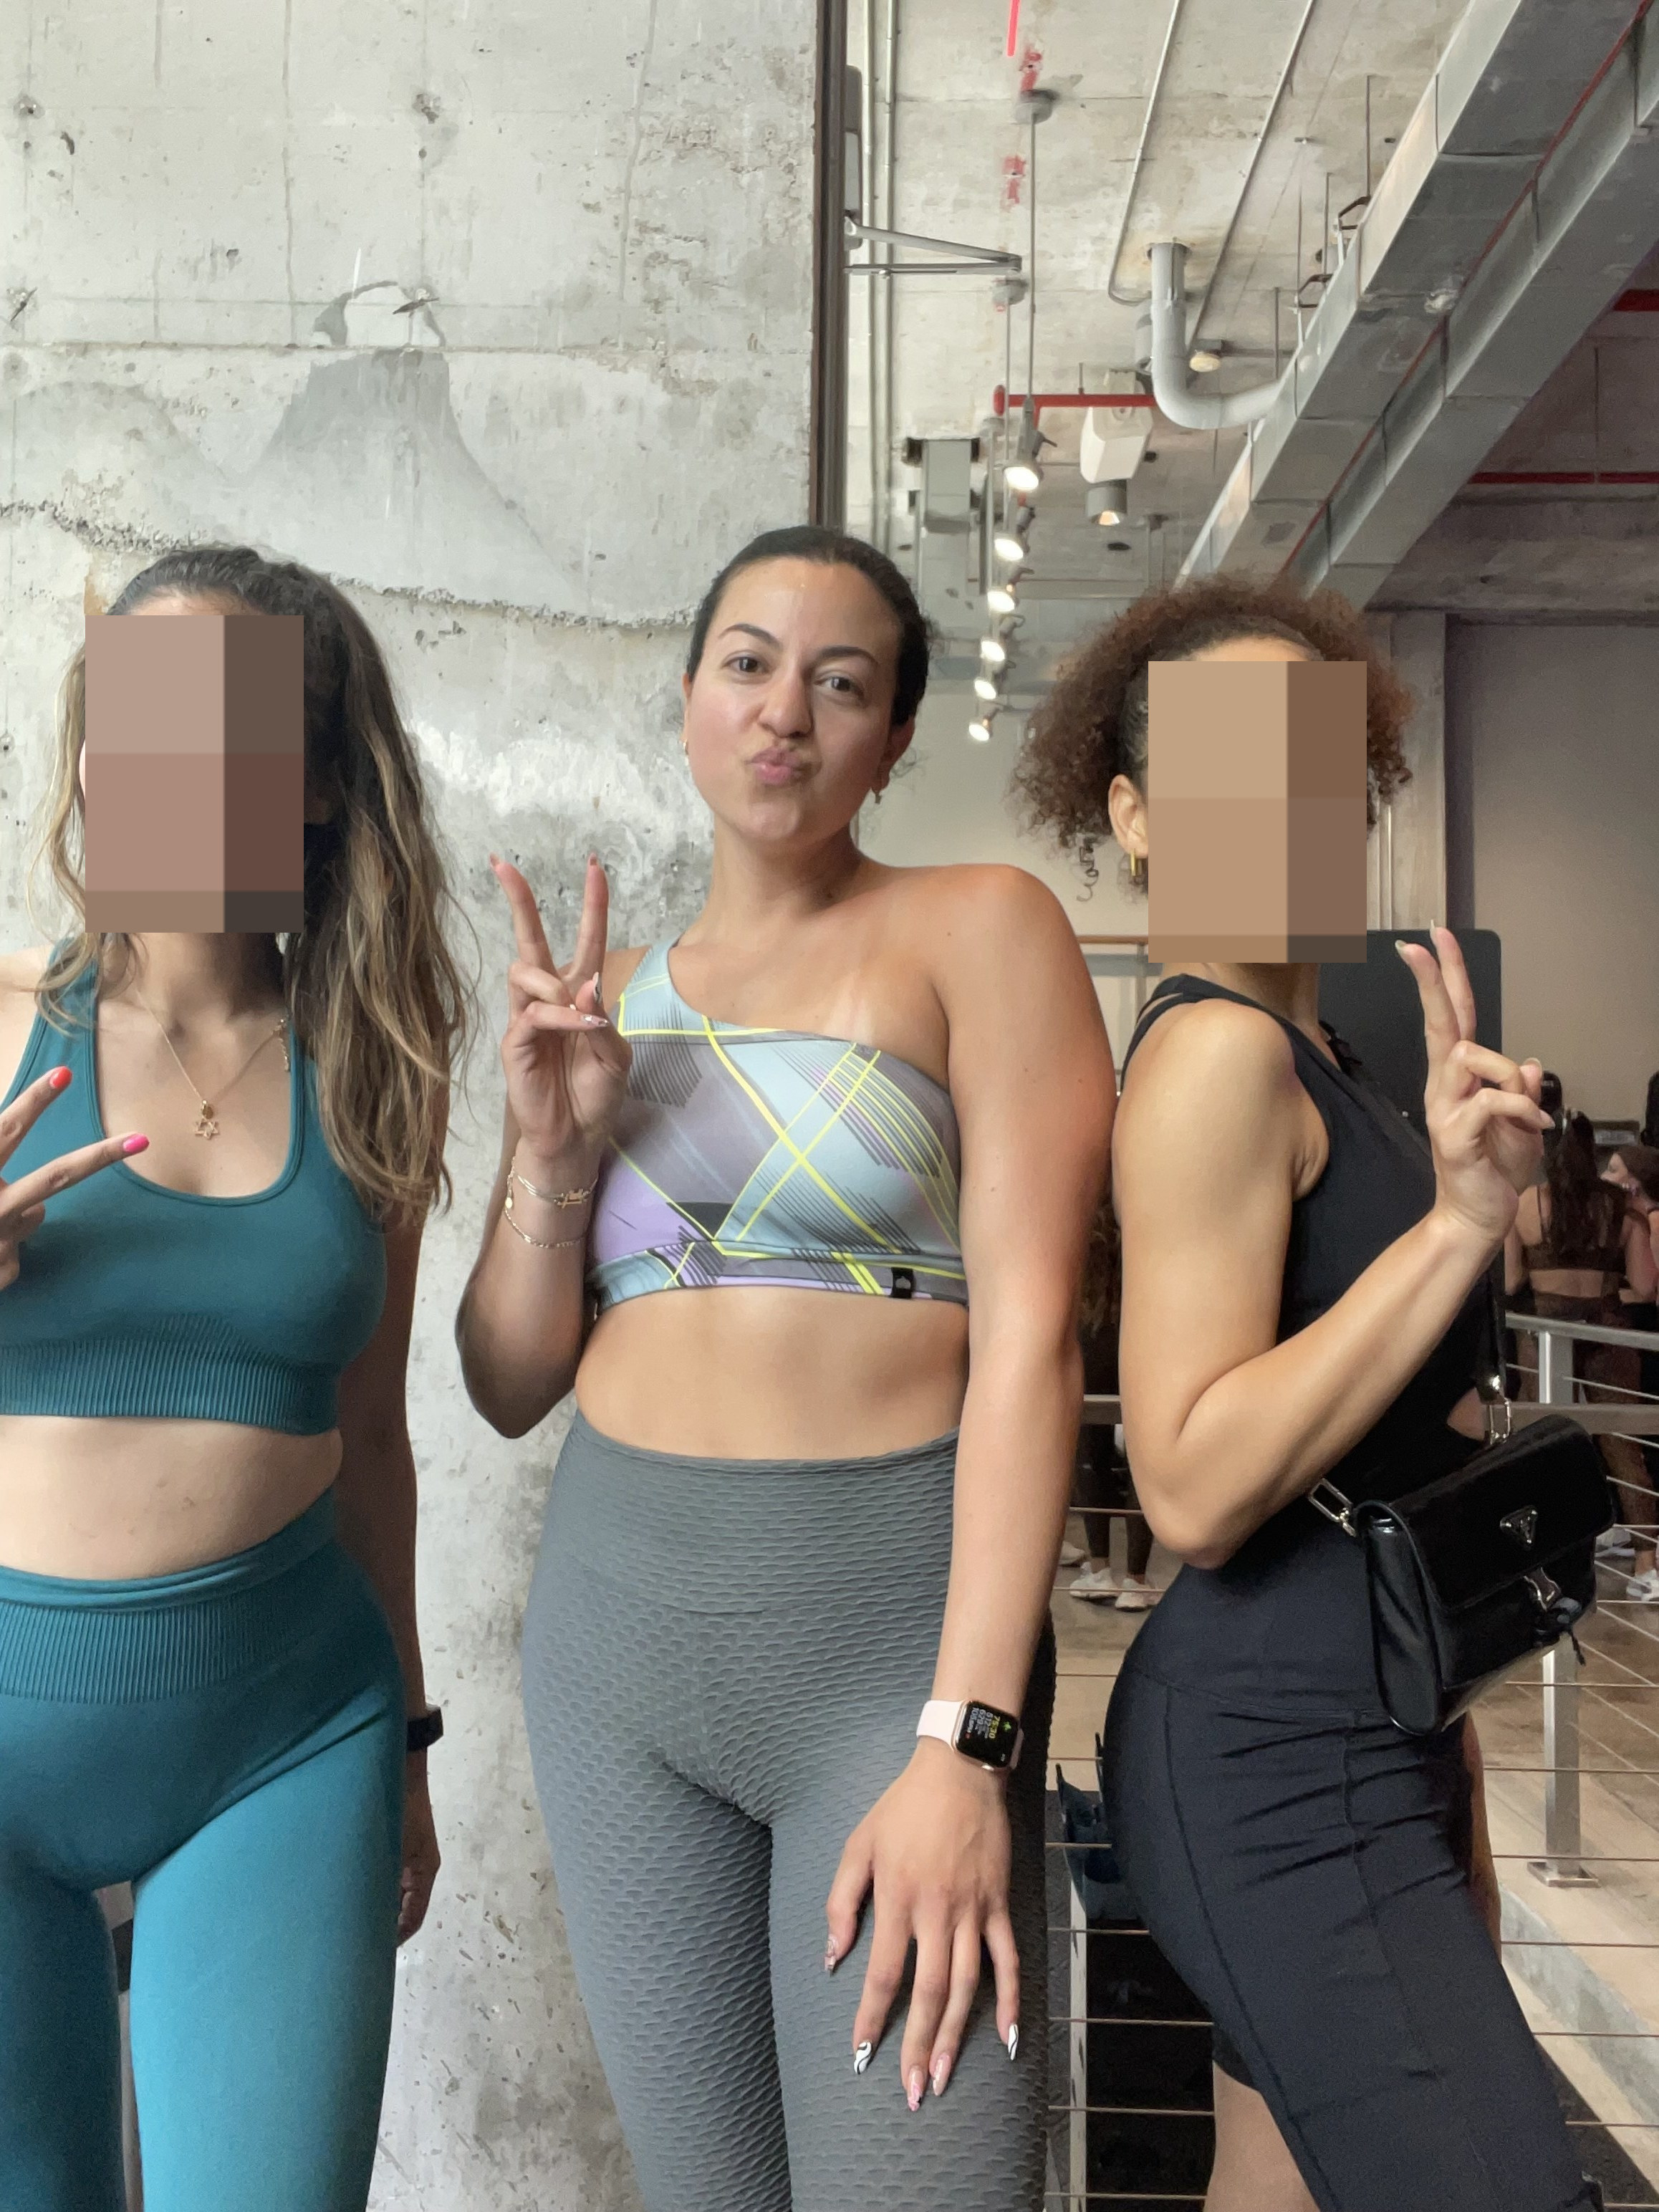 the author posing with two people after a workout class